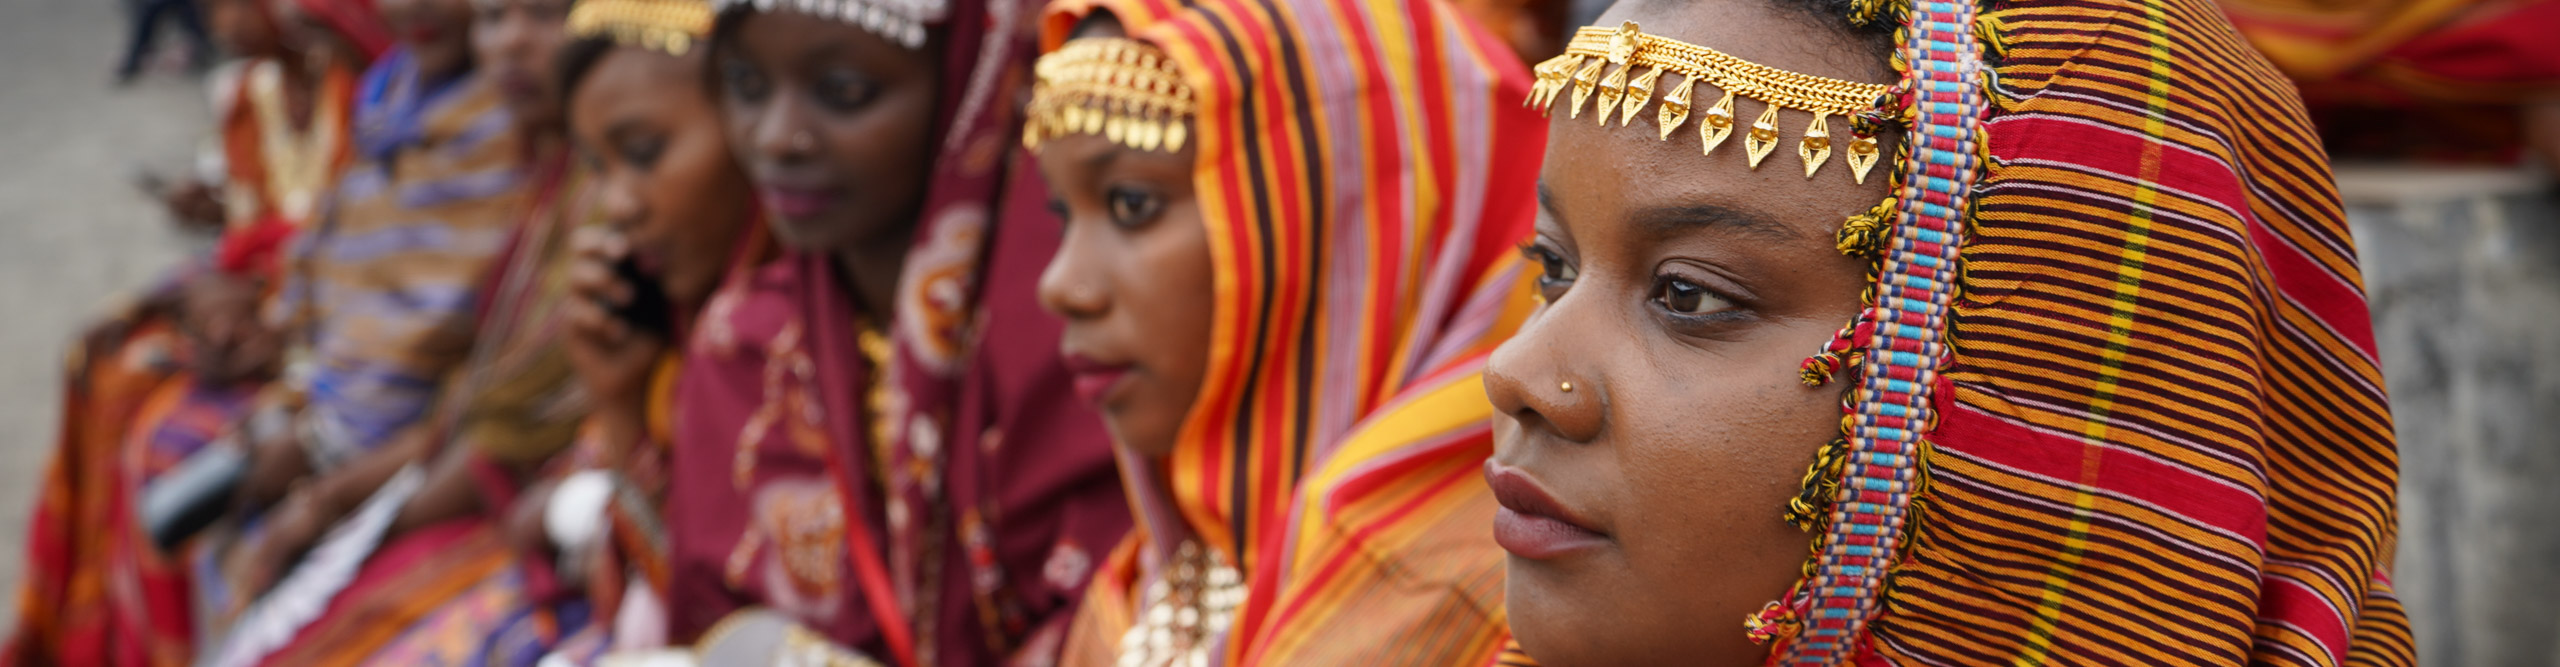 Group of local women in traditional dress in the Comoros Islands, East Africa 